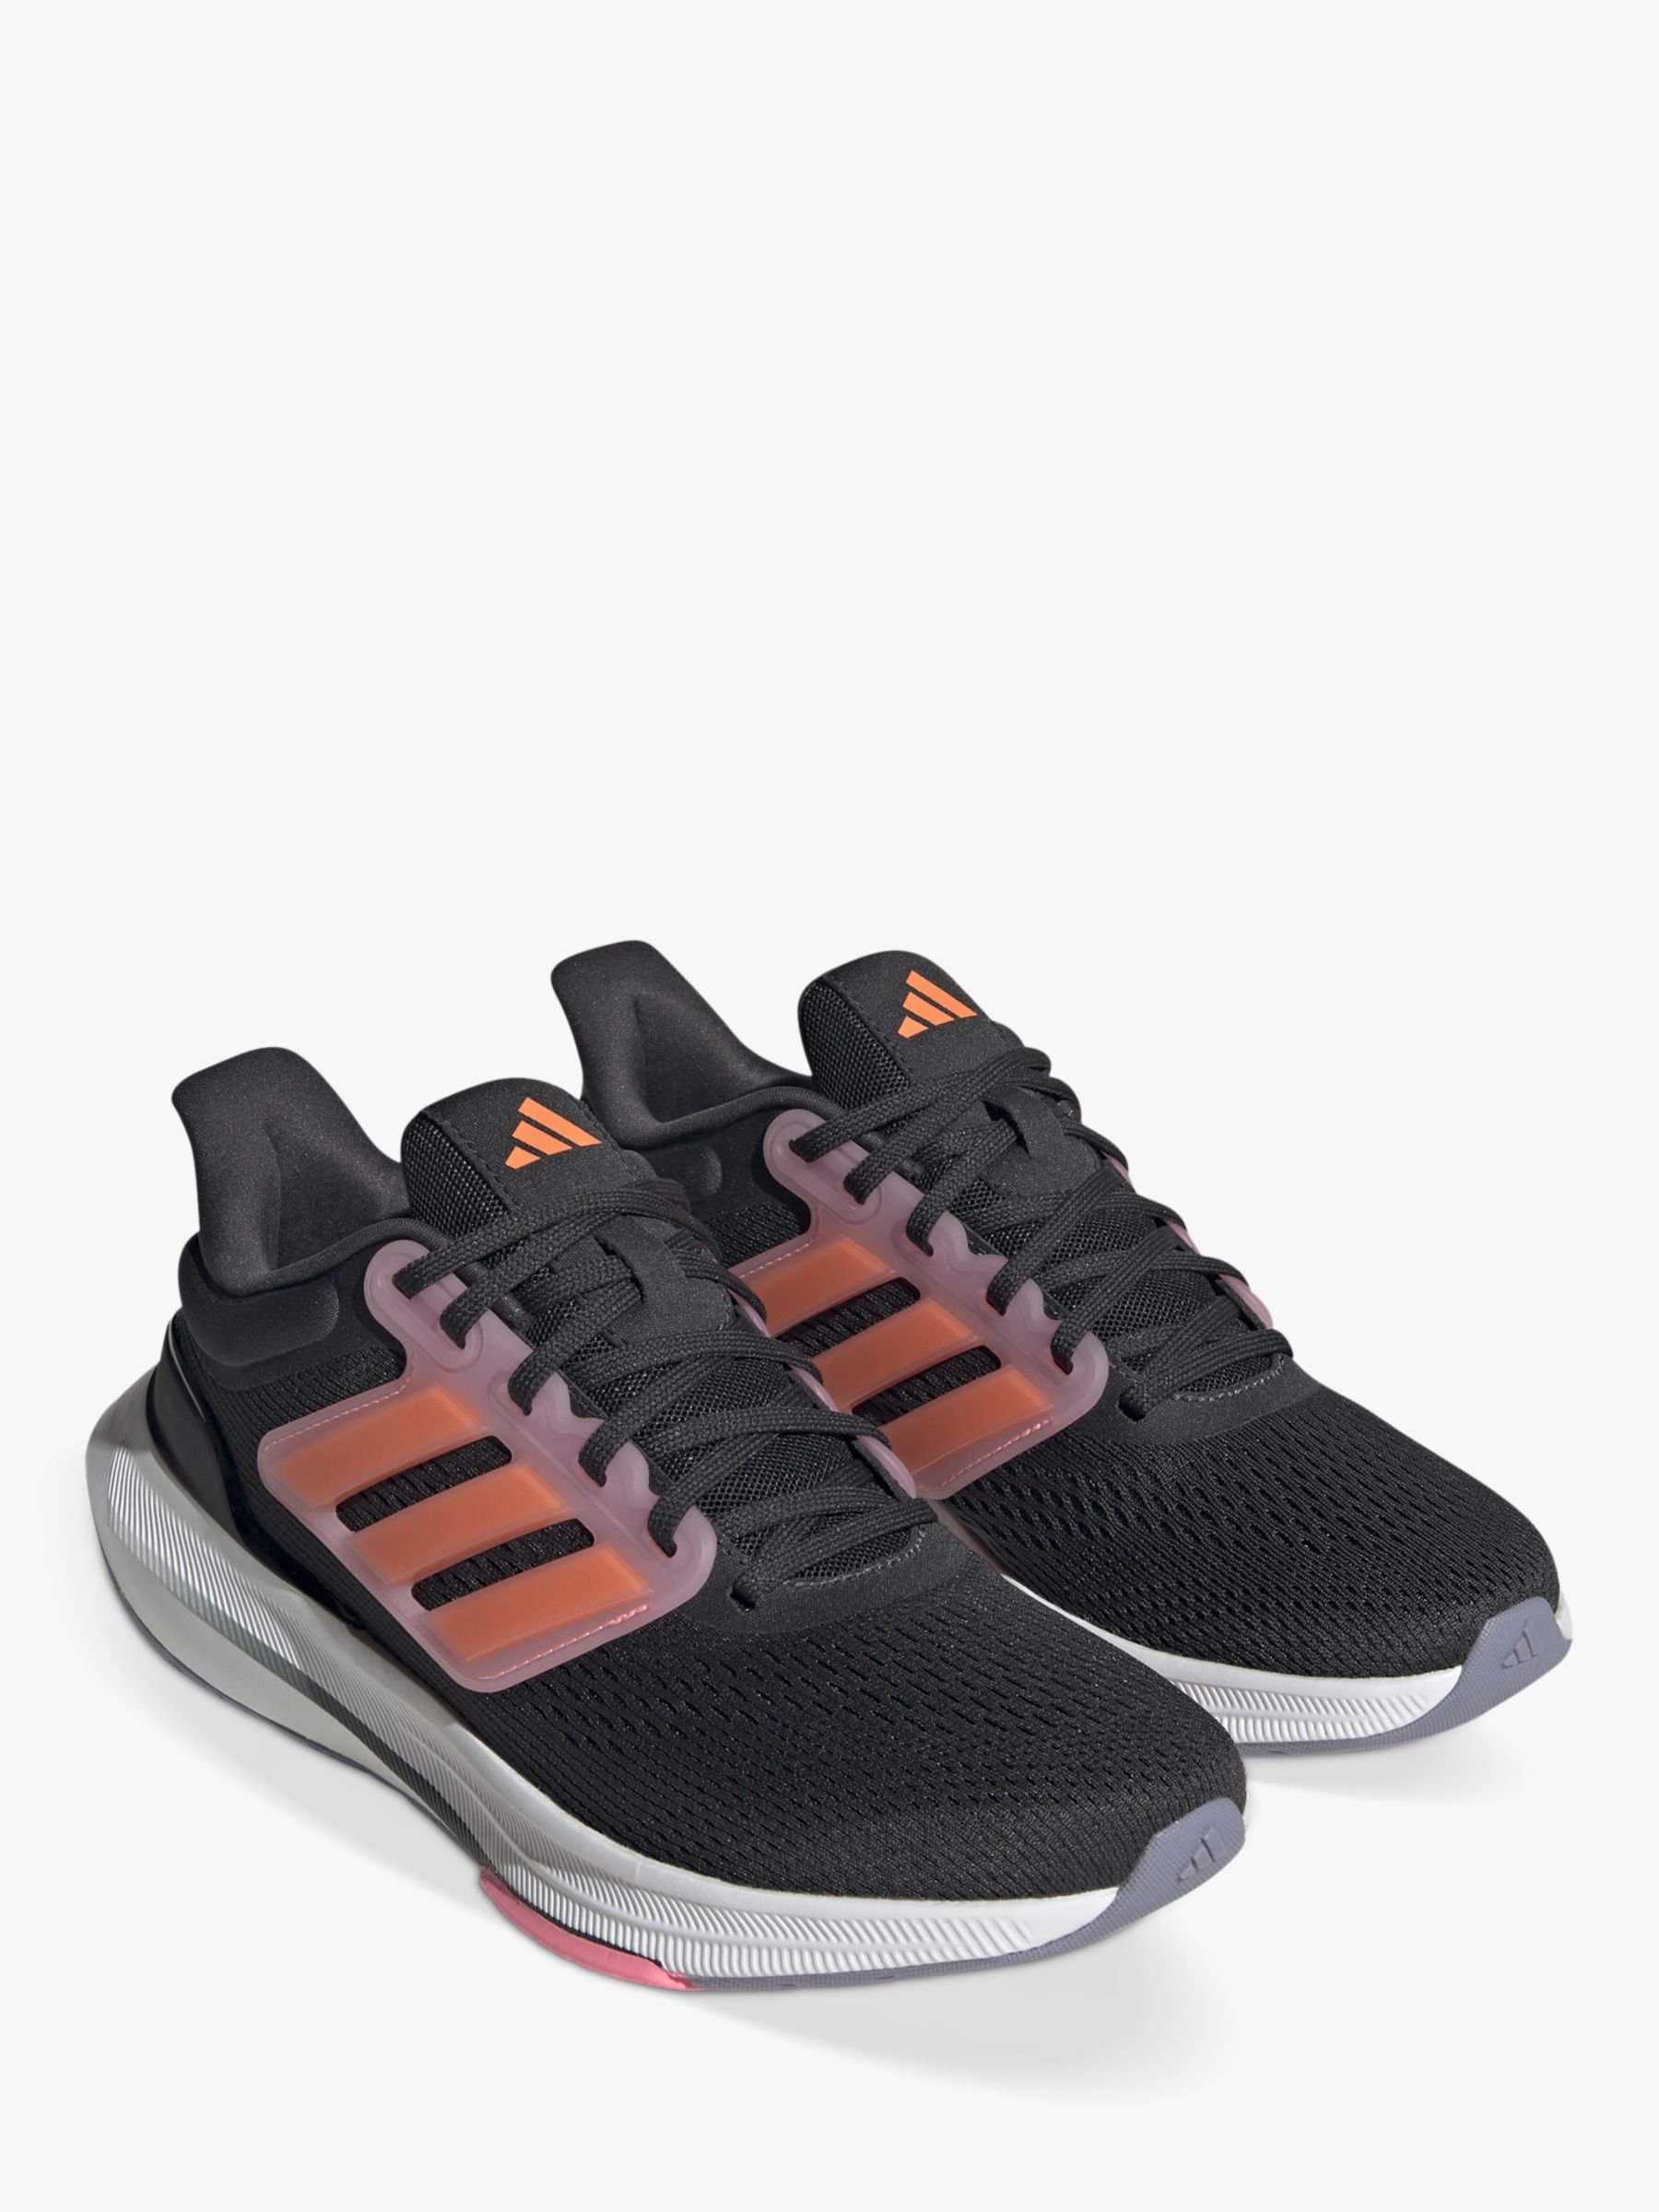 Buy adidas Ultrabounce Women's Running Shoes Online at johnlewis.com